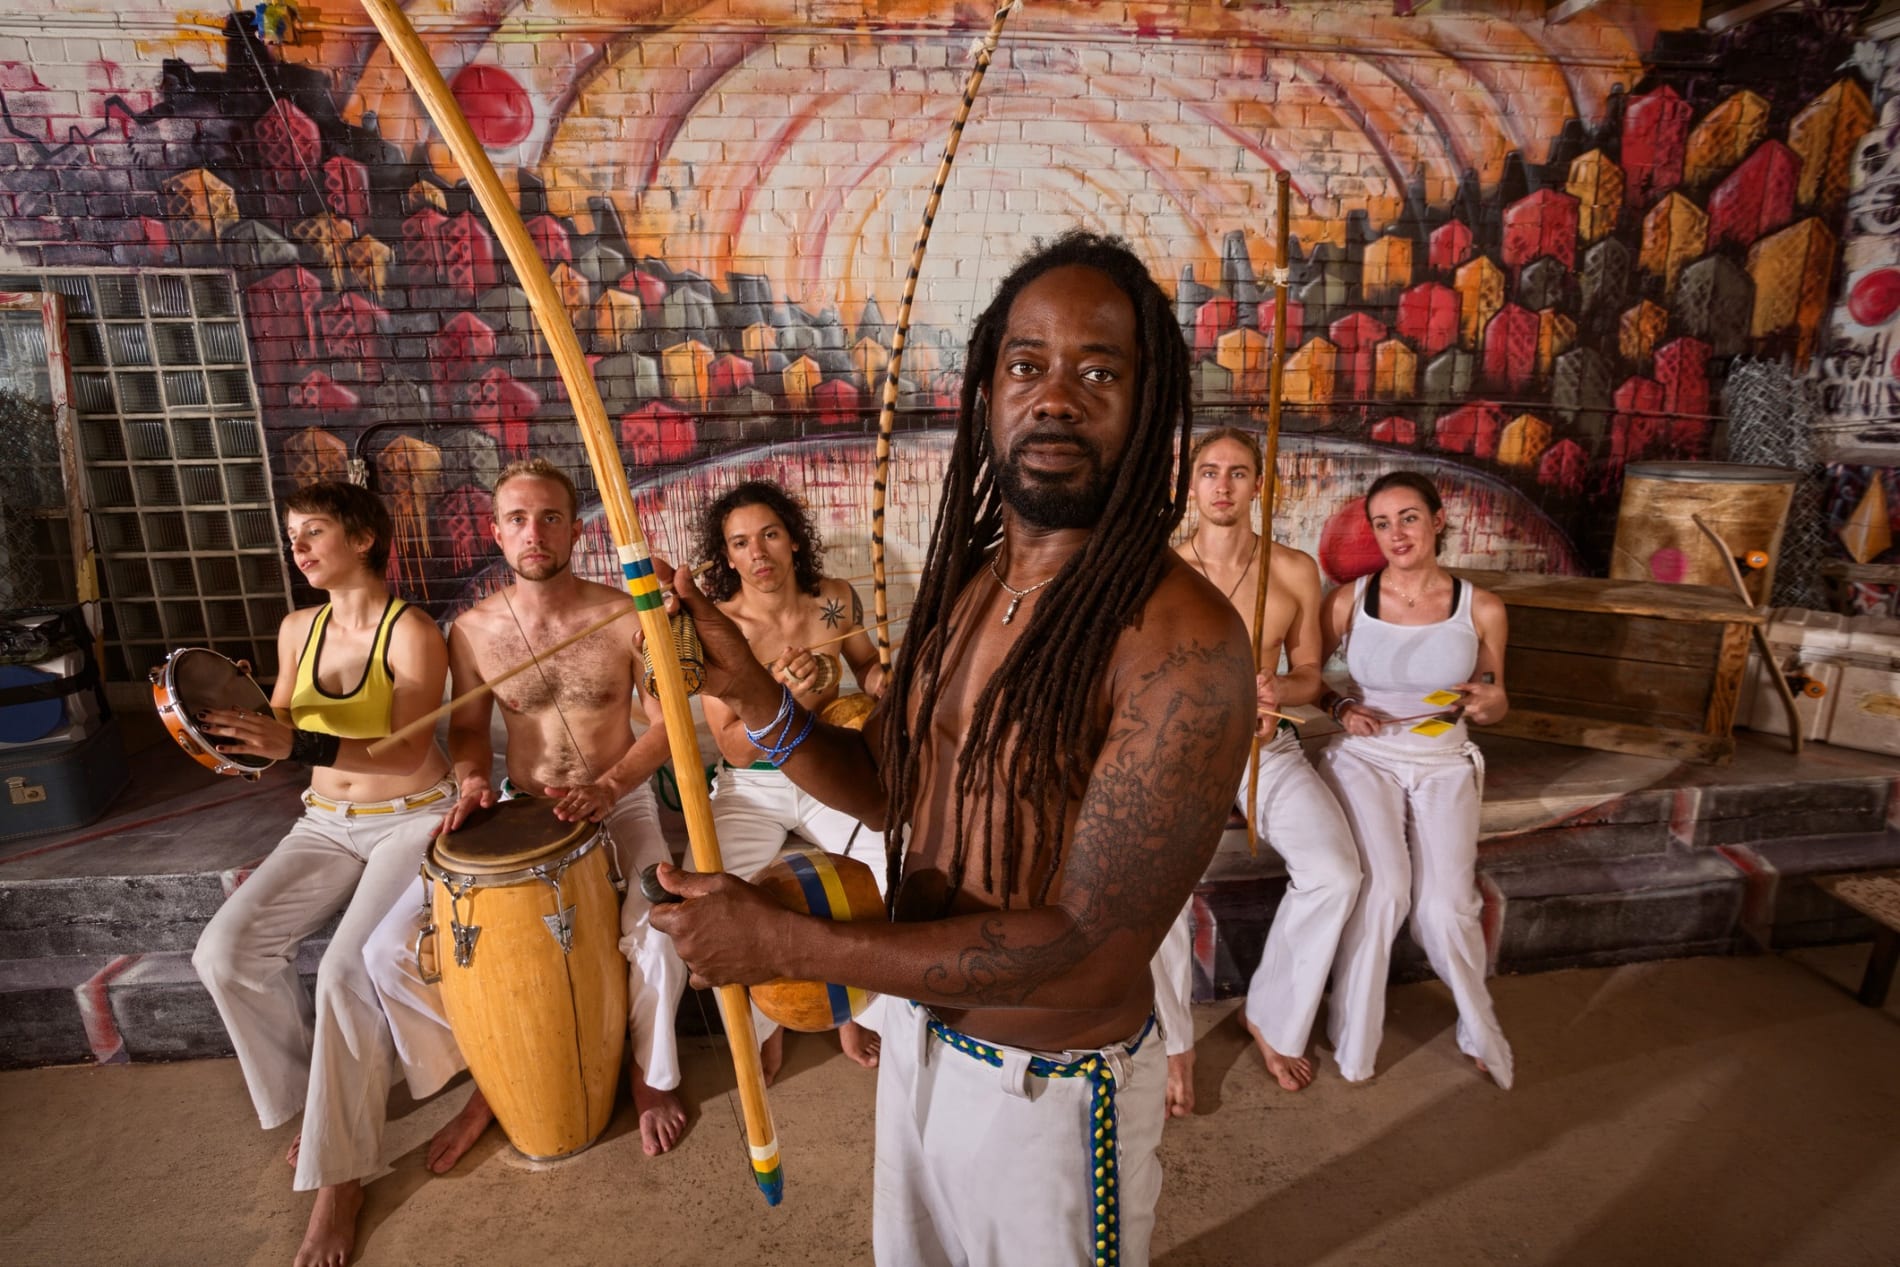 Capoeira Man with dreadlocks and instruments, with musicians behind him.